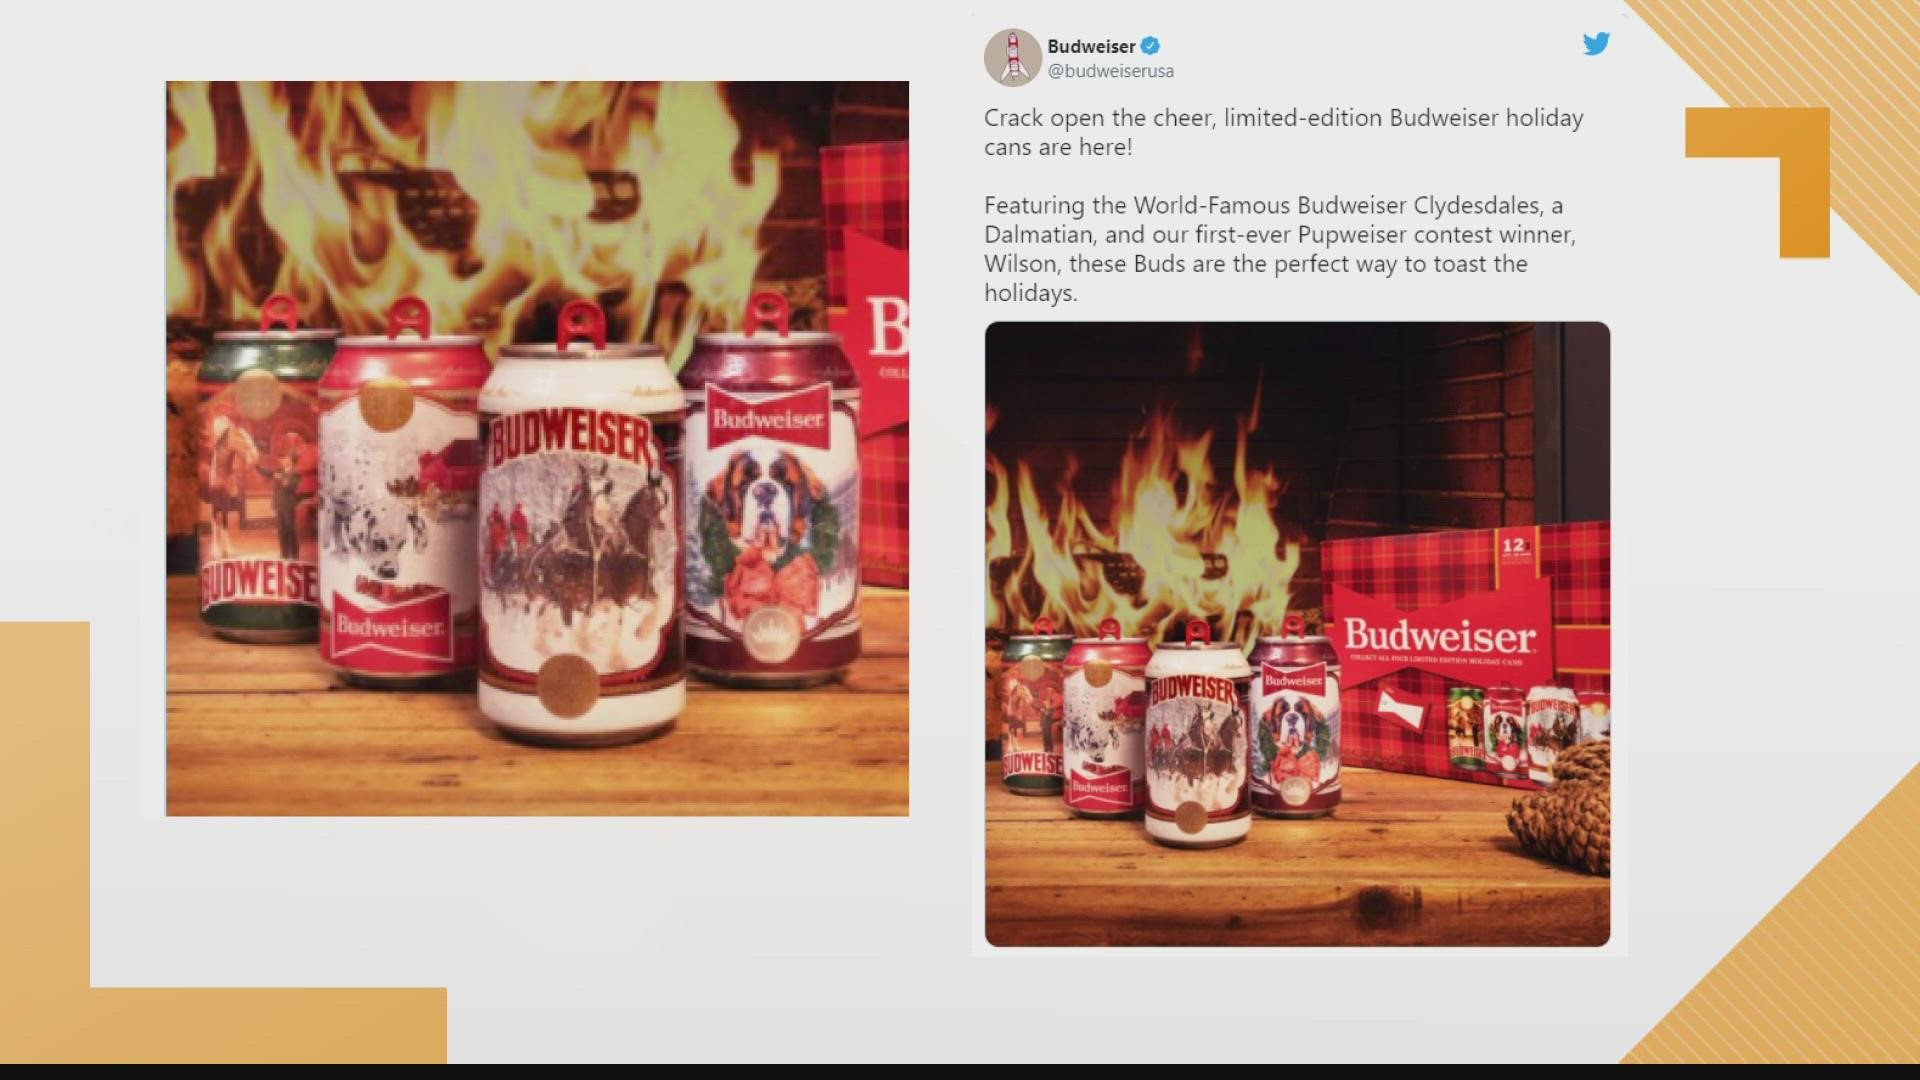 Budweiser has unveiled its limited-edition holiday beer cans for 2021. The beer cans feature plaid designs, winter landscapes and Budweiser Clydesdales.